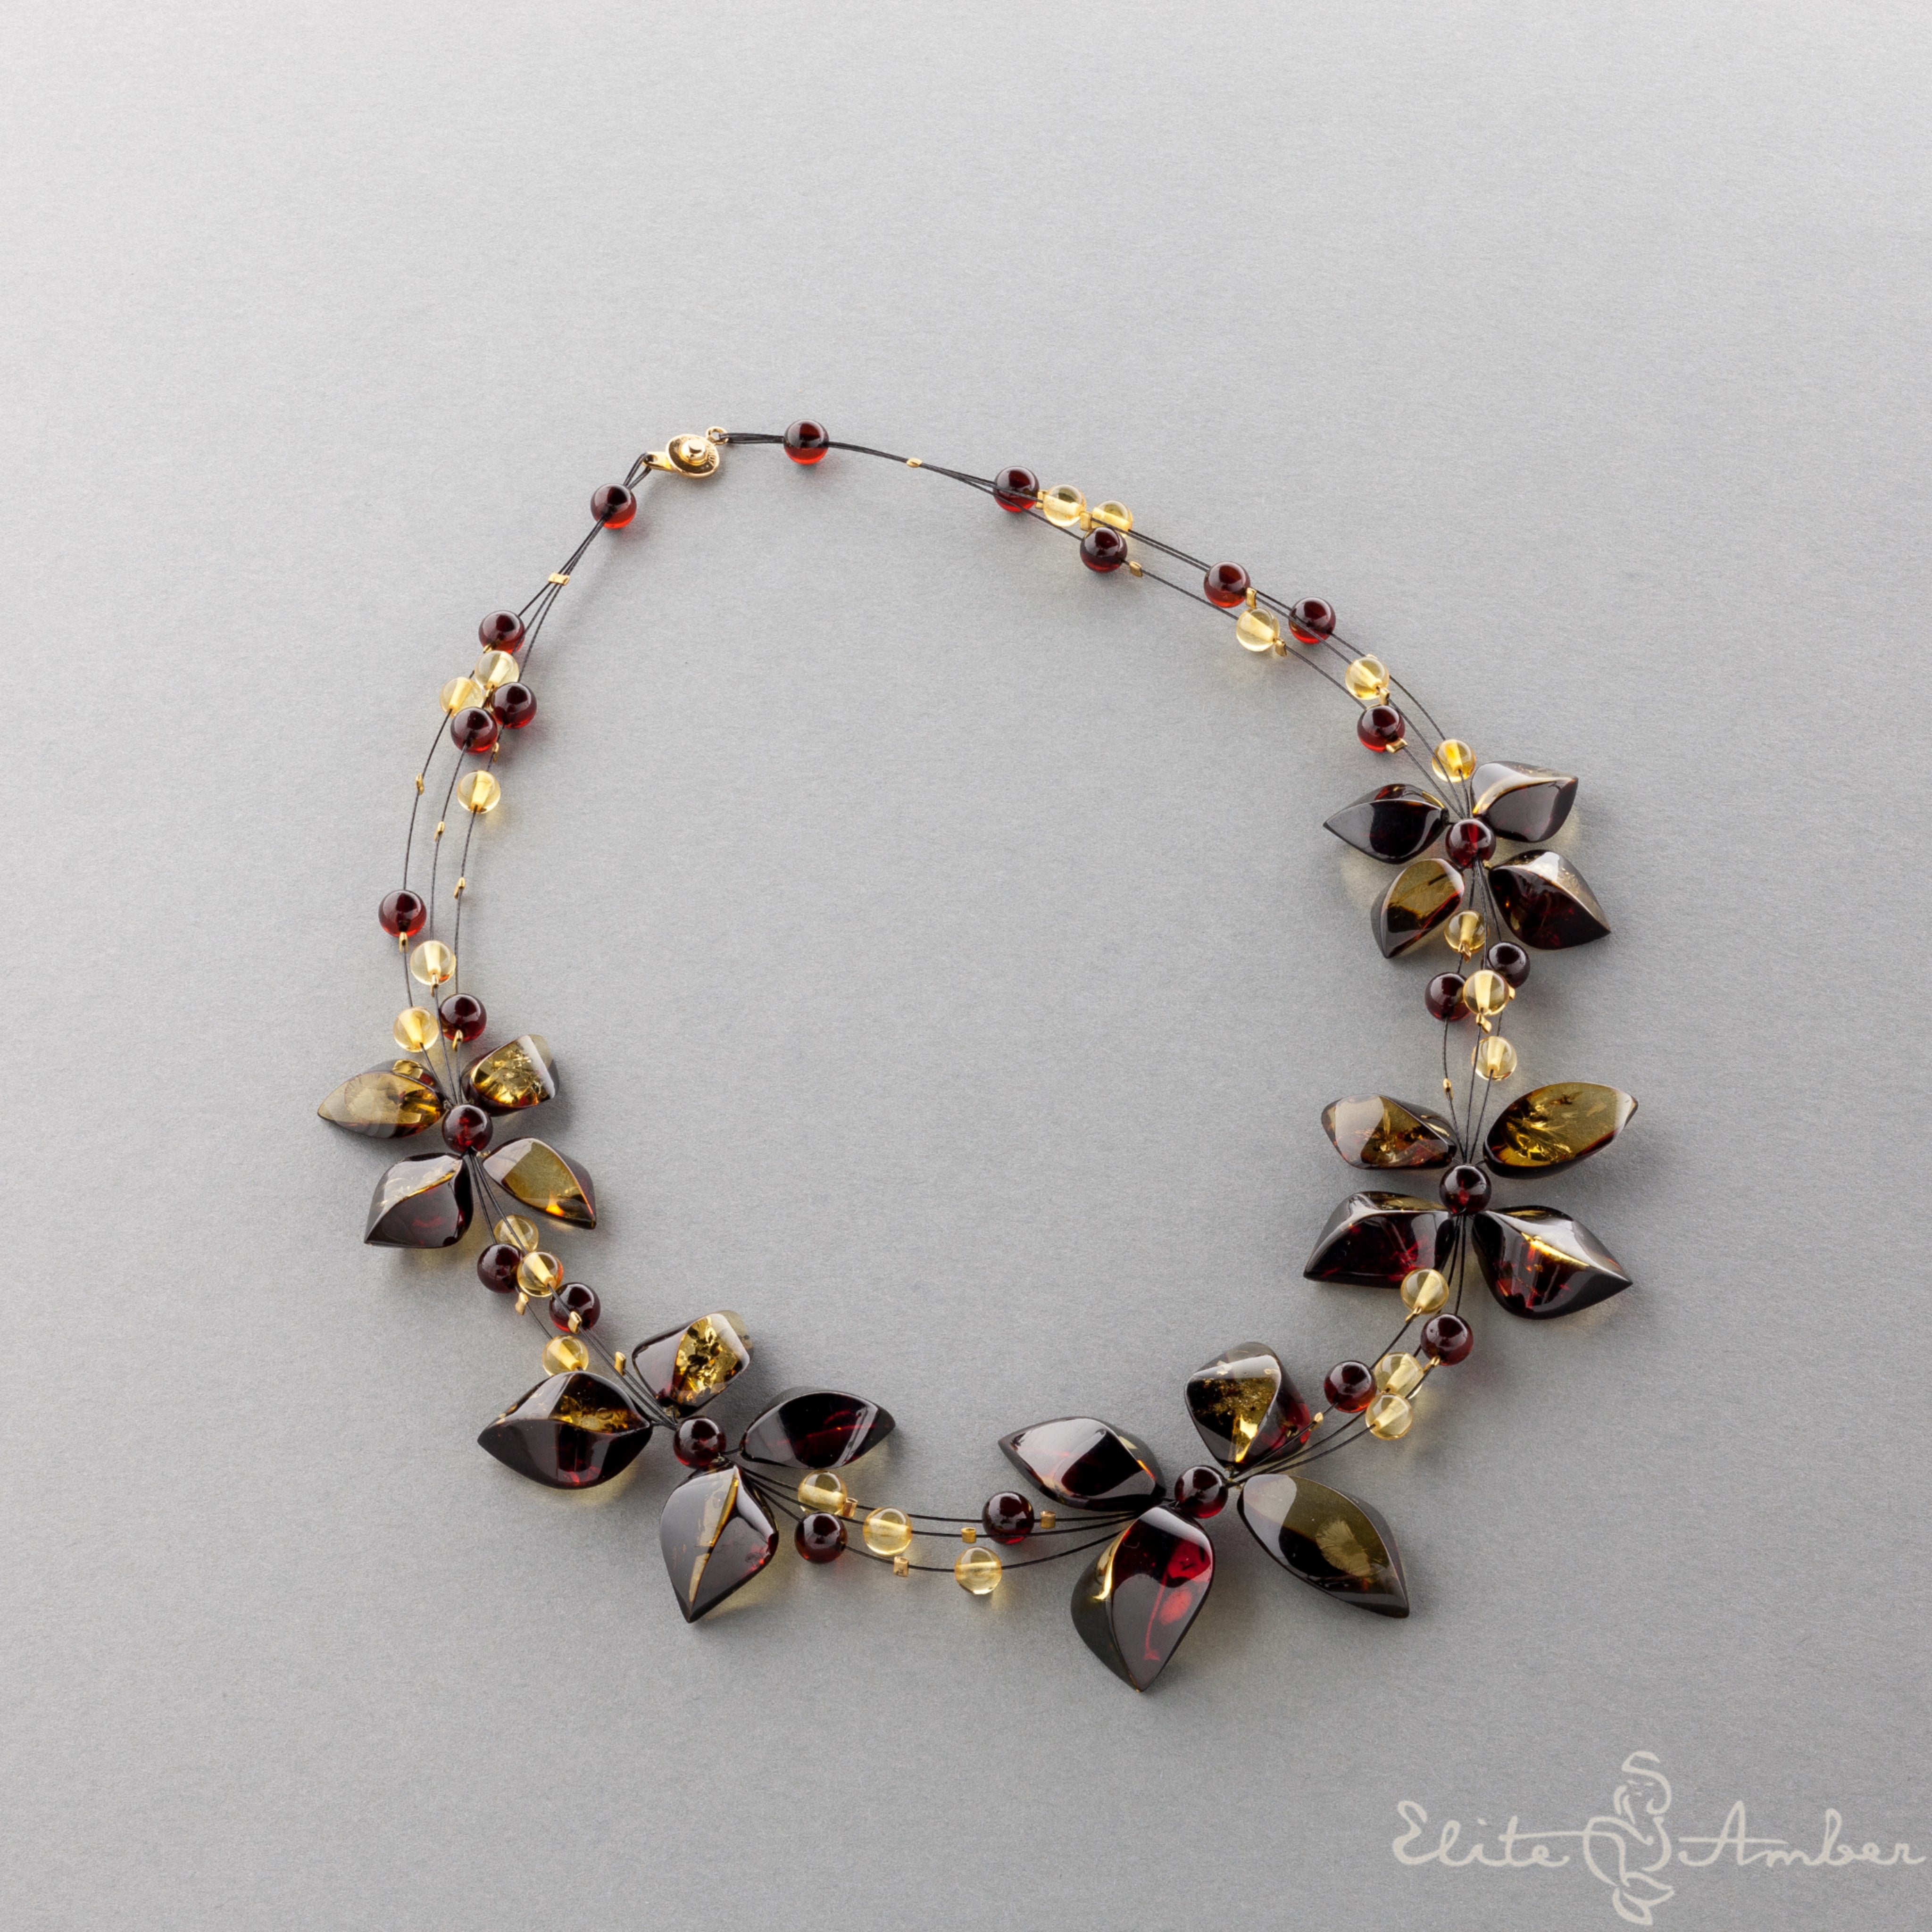 Amber necklace "Brilliant wind flowers"